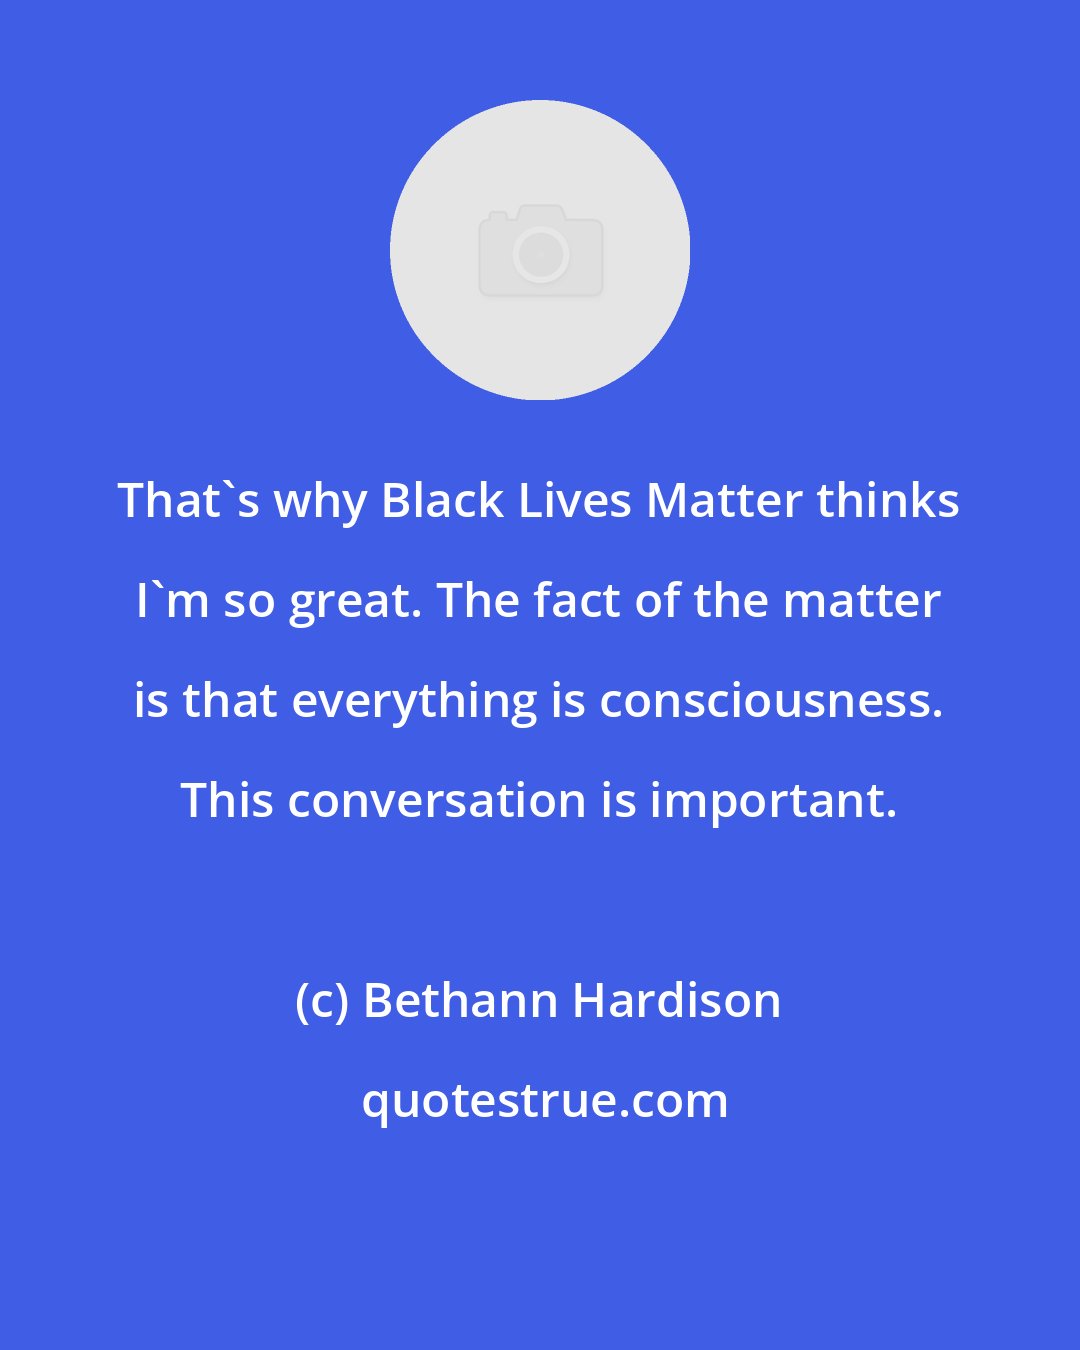 Bethann Hardison: That's why Black Lives Matter thinks I'm so great. The fact of the matter is that everything is consciousness. This conversation is important.